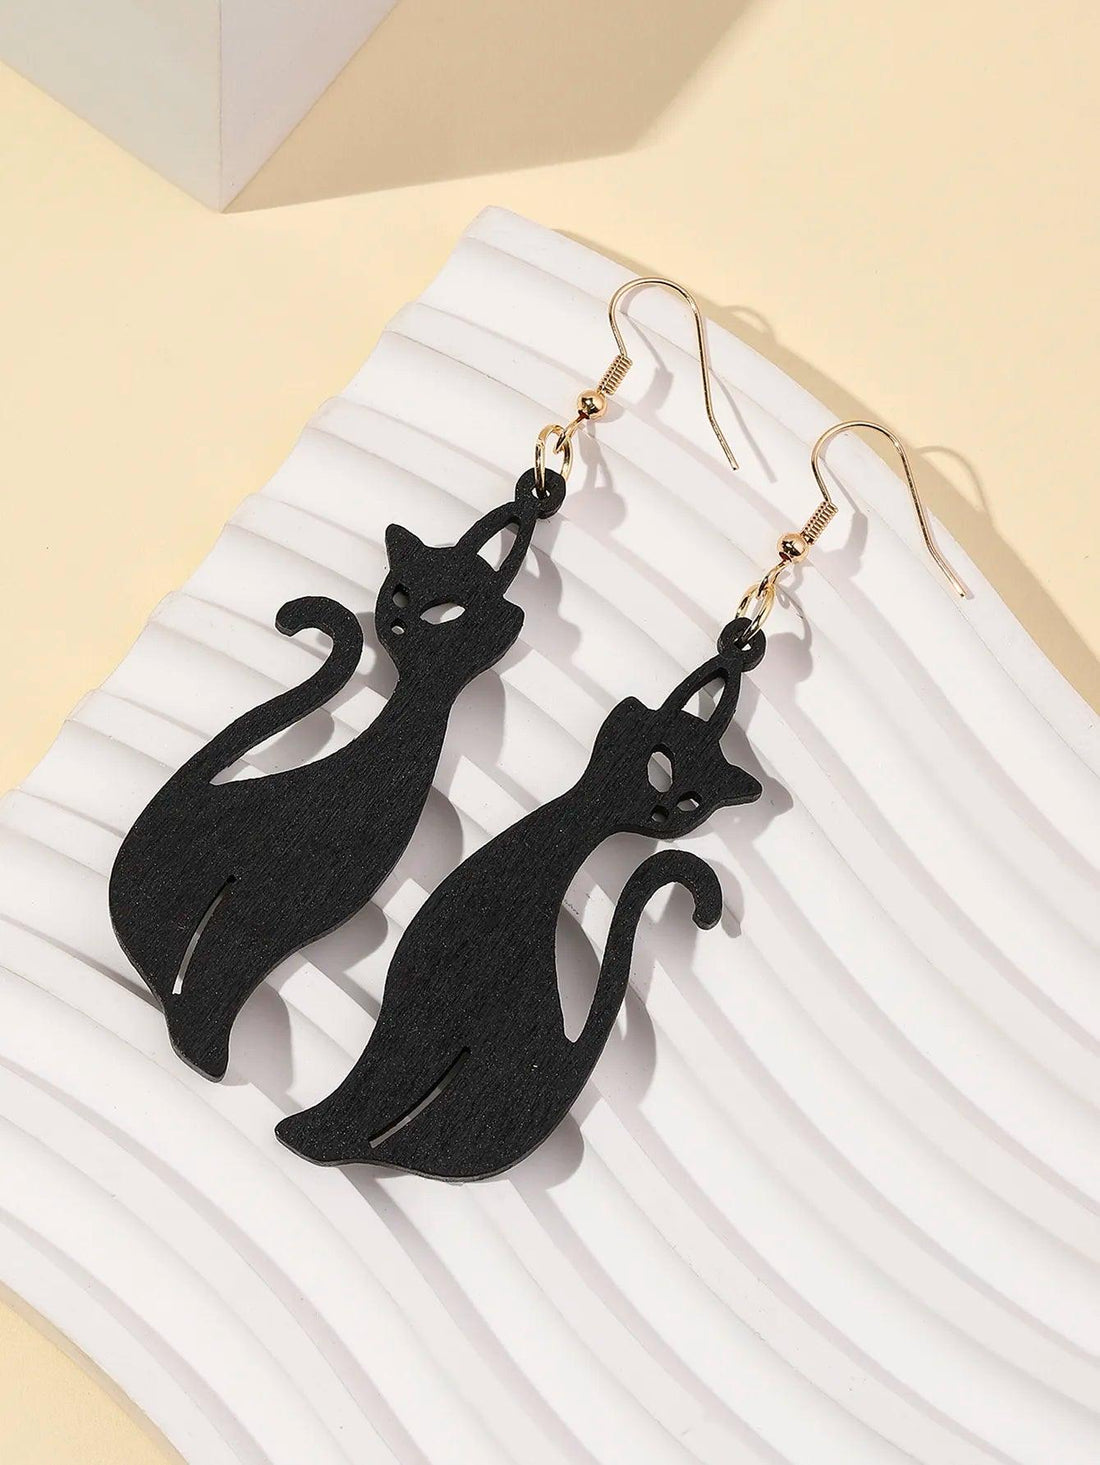 Halloween Wooden Black Cat Drop Earrings - Just Cats - Gifts for Cat Lovers